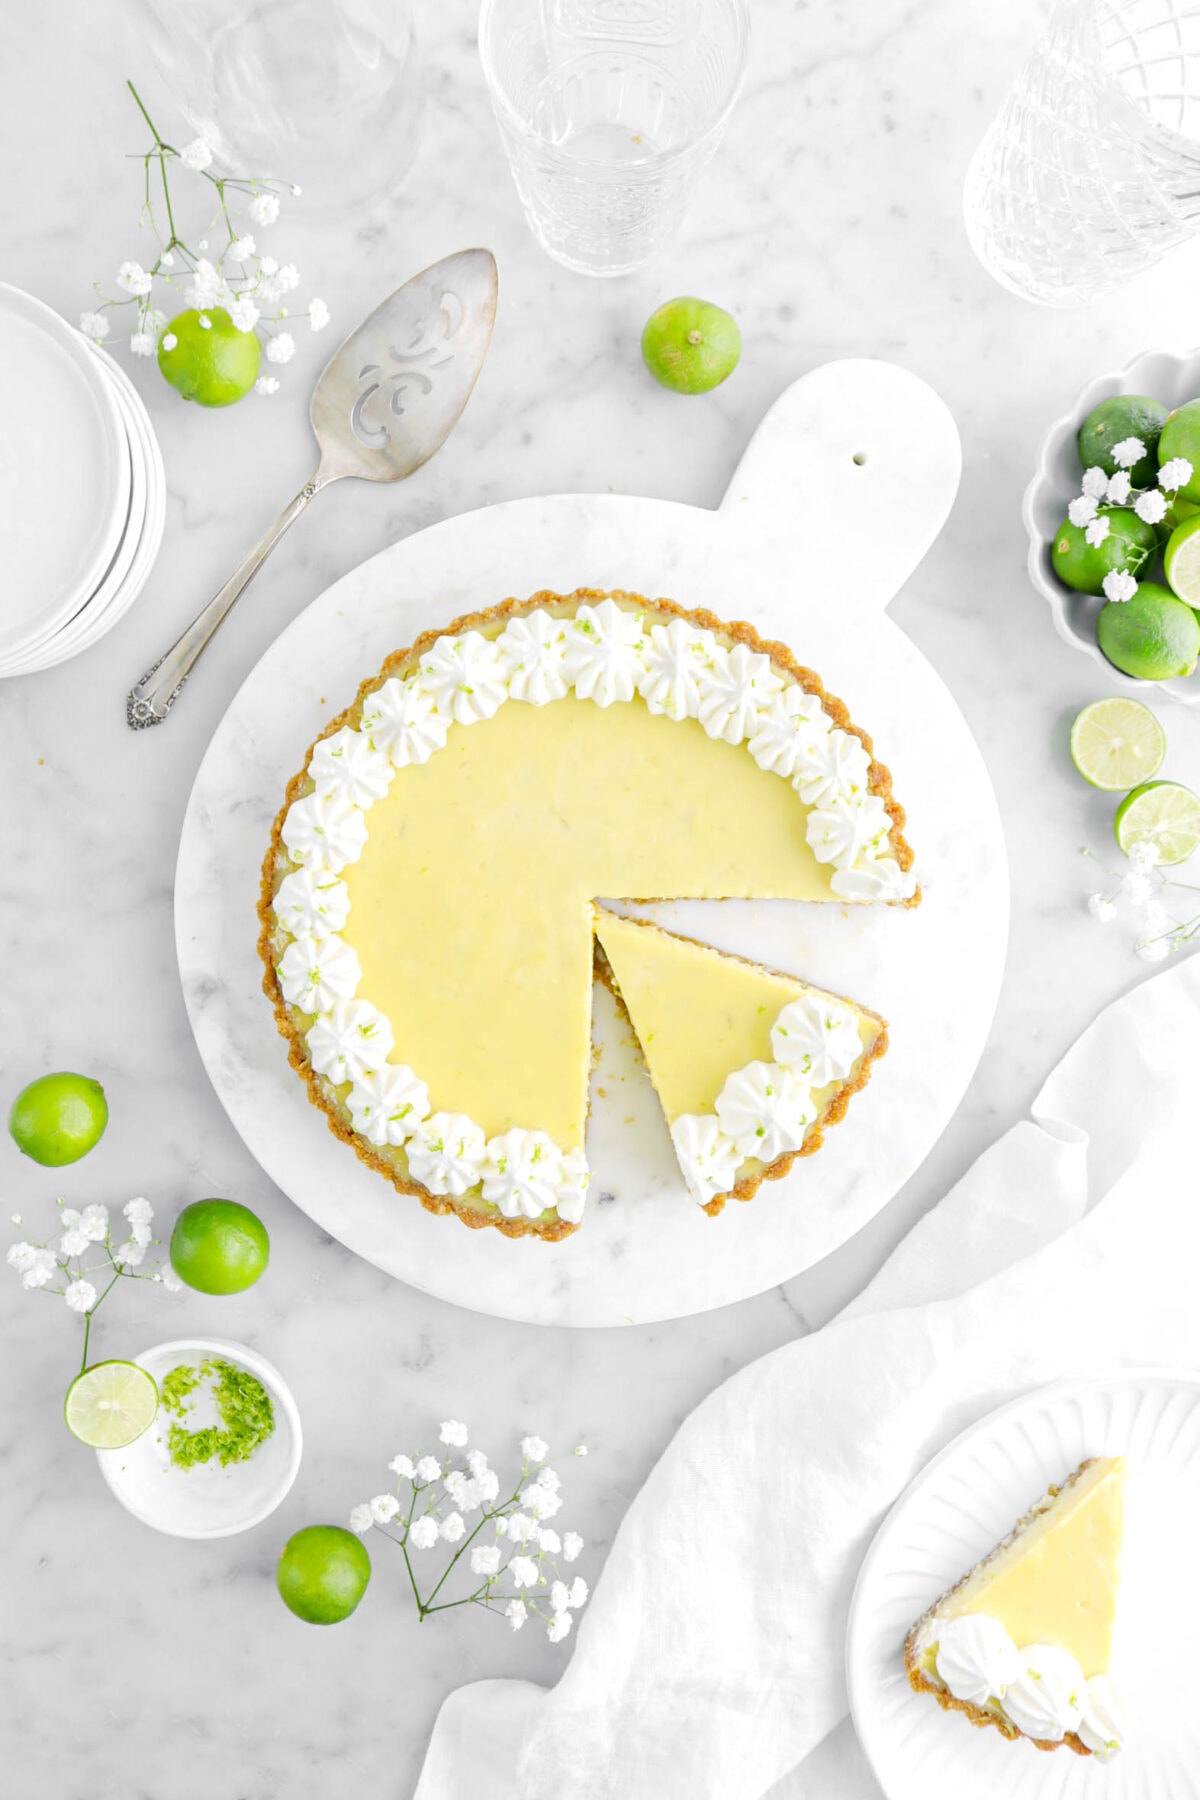 key lime pie with slice cut into it with another slice on white plate beside with key limes and white flowers around on marble surface.